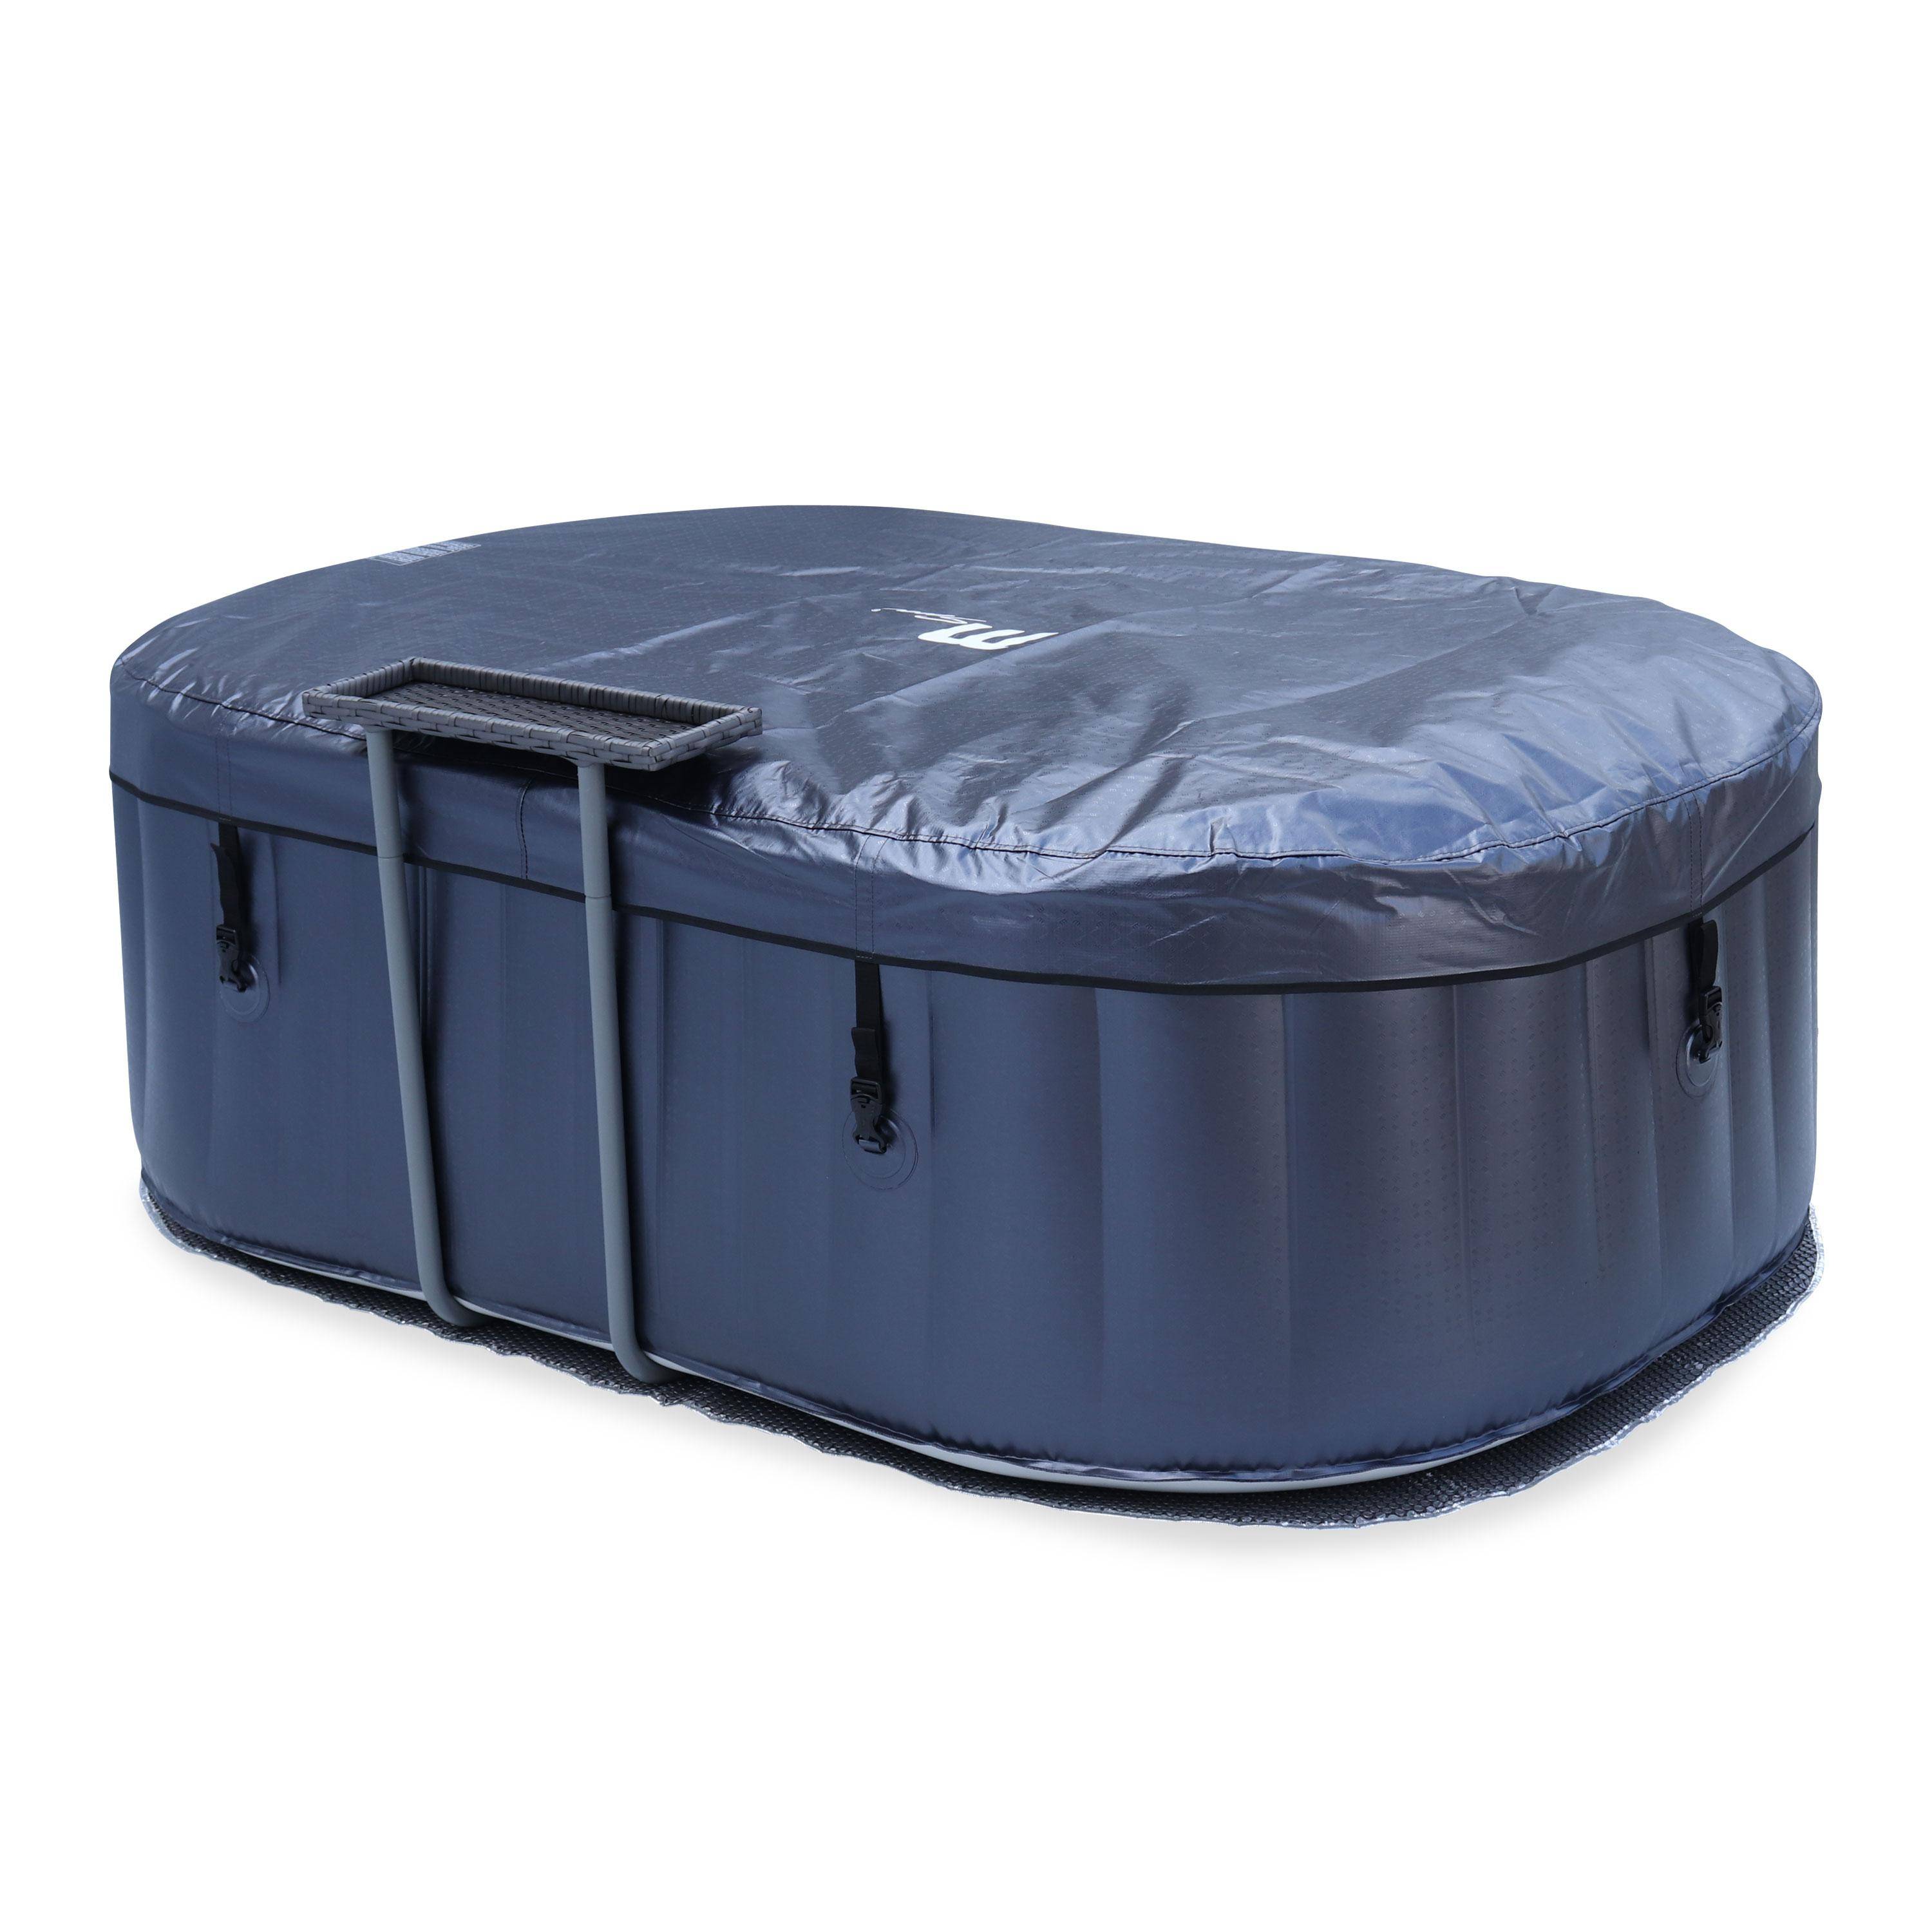  2-person premium inflatable hot tub MSpa - side table, heat-retaining mat, cover, inflatable cover support and remote control - Nest 2 - Blue,sweeek,Photo2